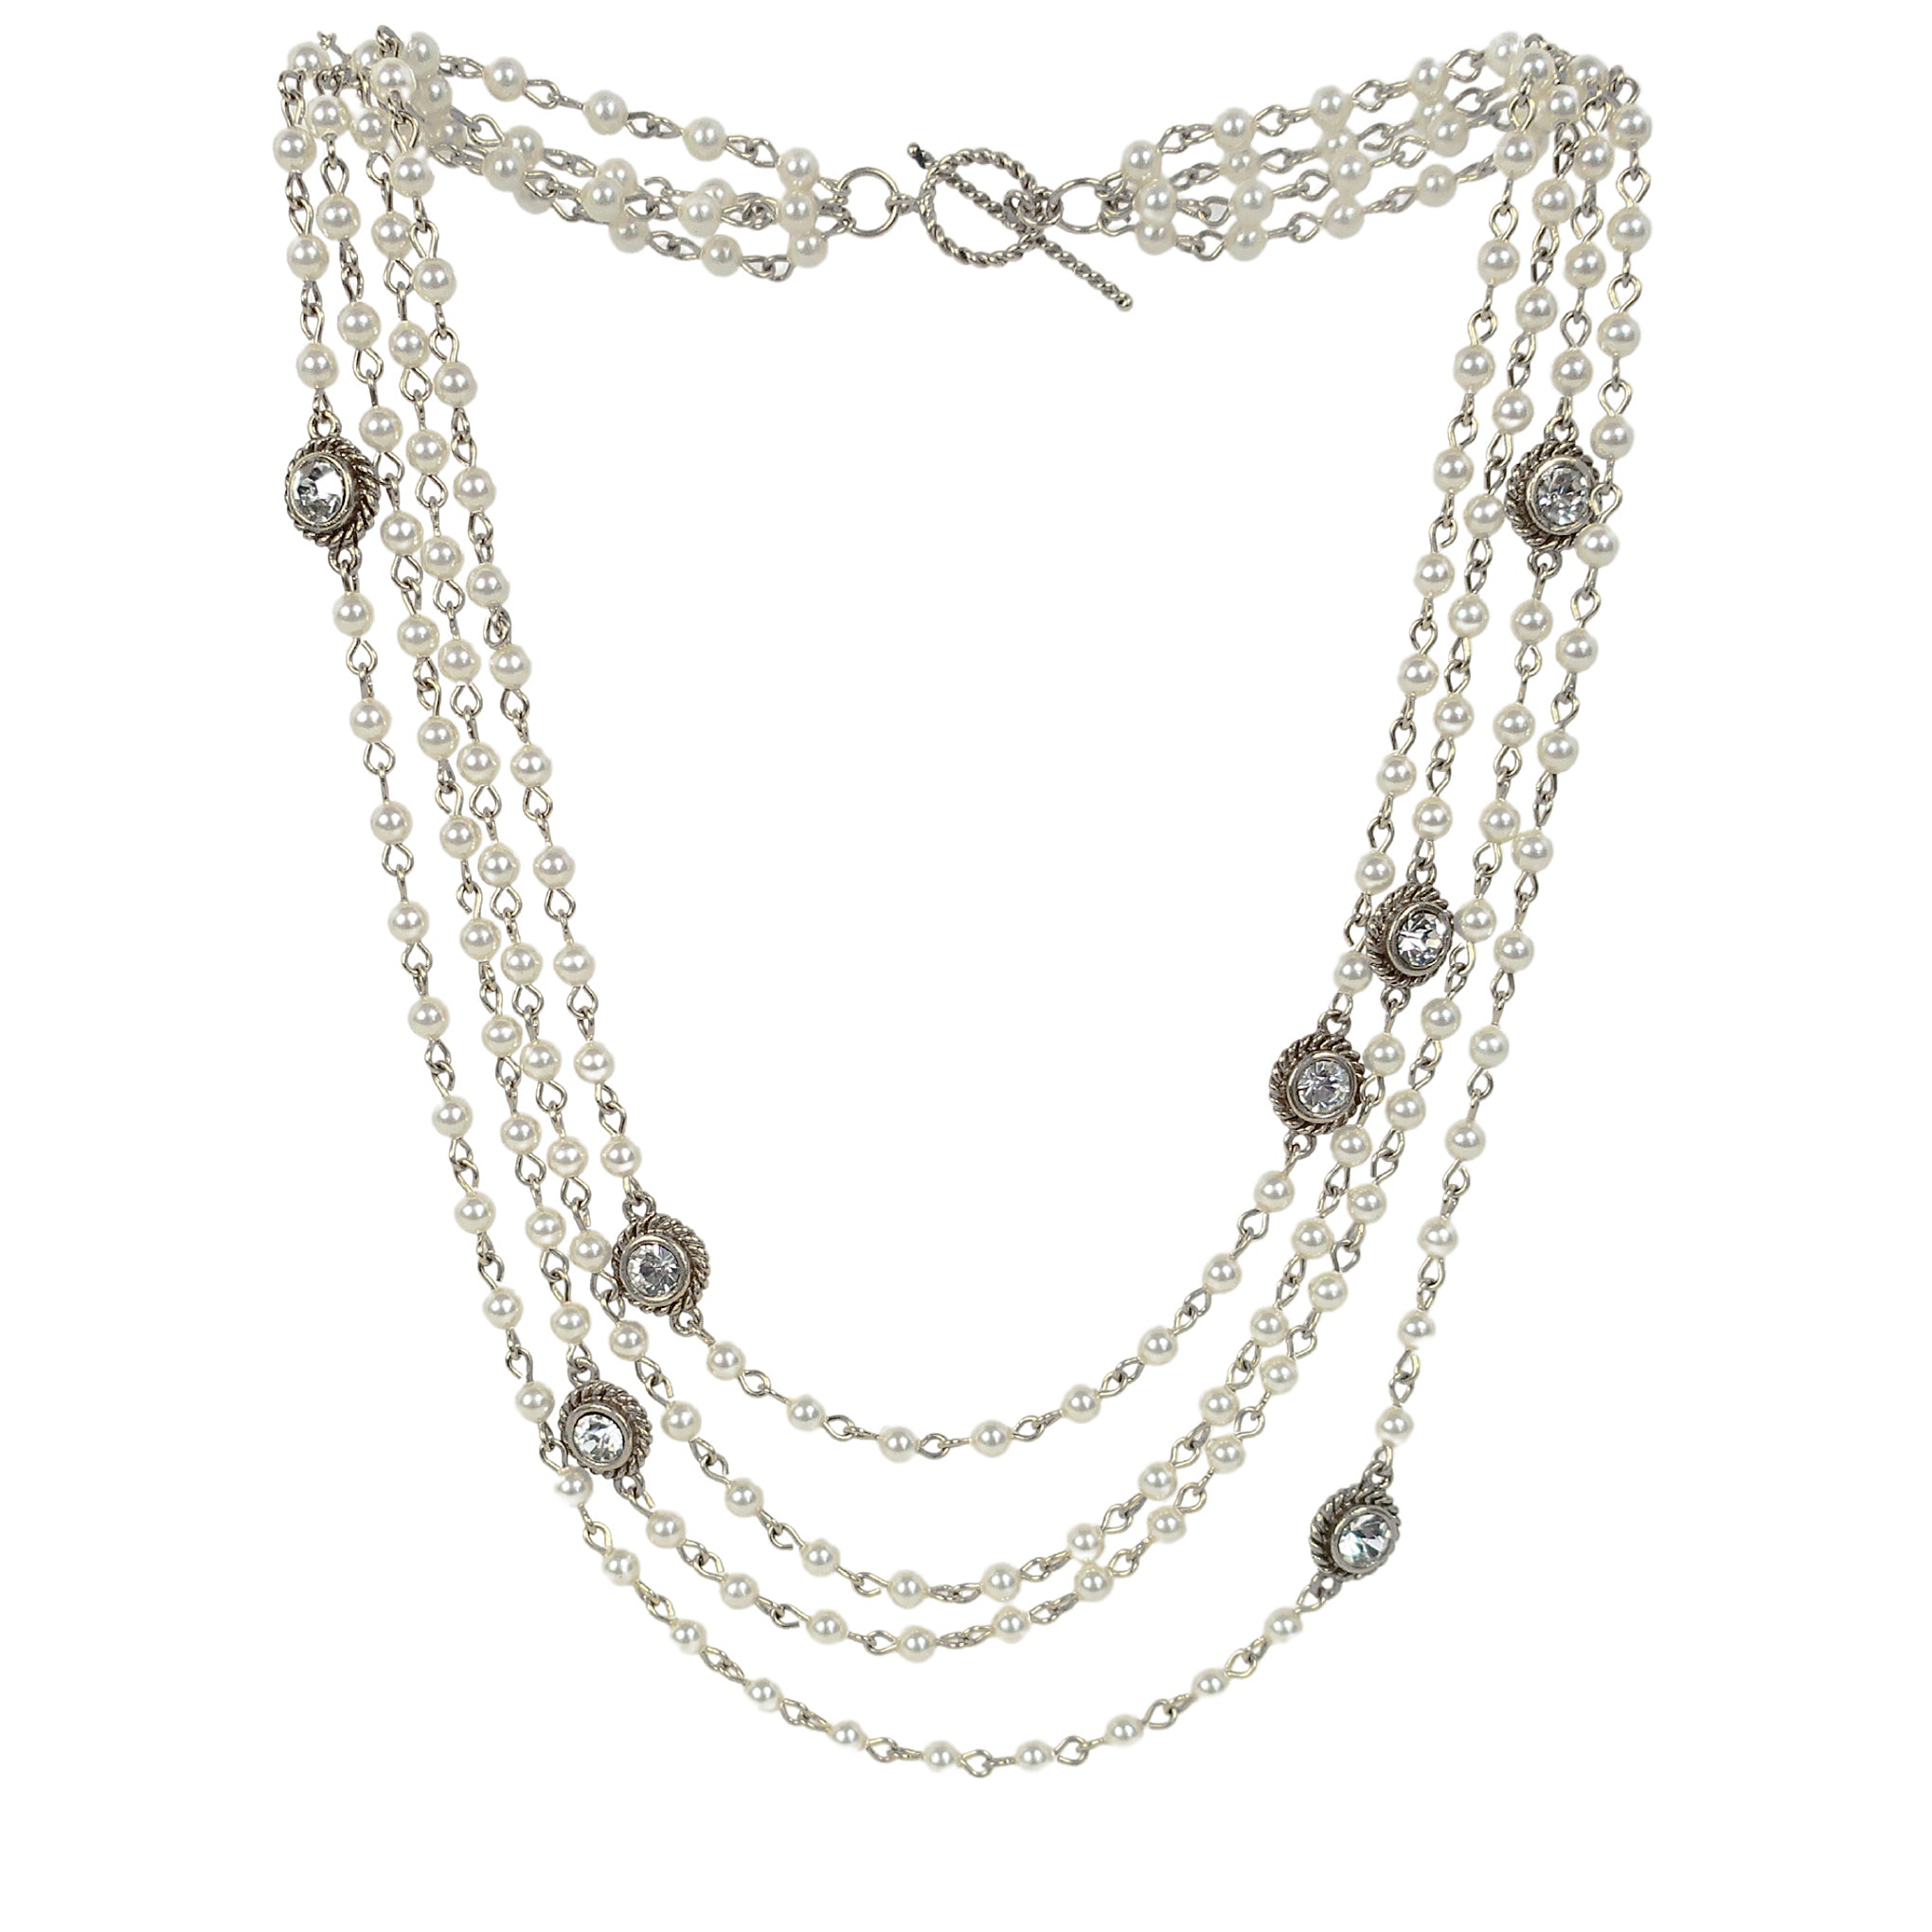 VSA Magdalena Statement Necklace in Silver and 4mm Cream Crystal Pearl Beads